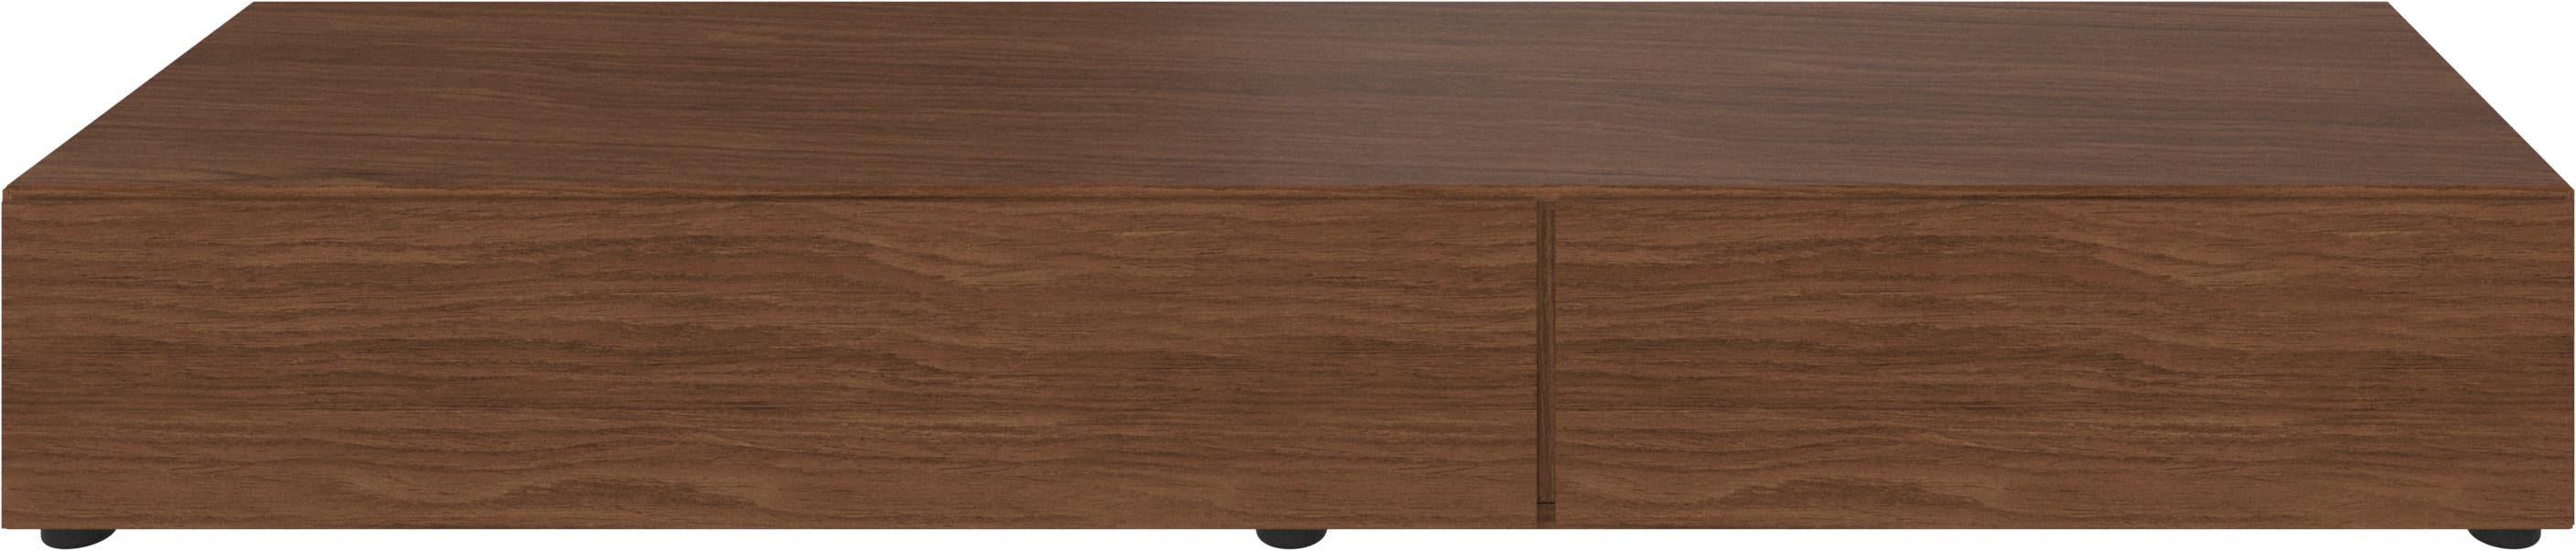 Lugano base cabinet with drawer and drop-down door